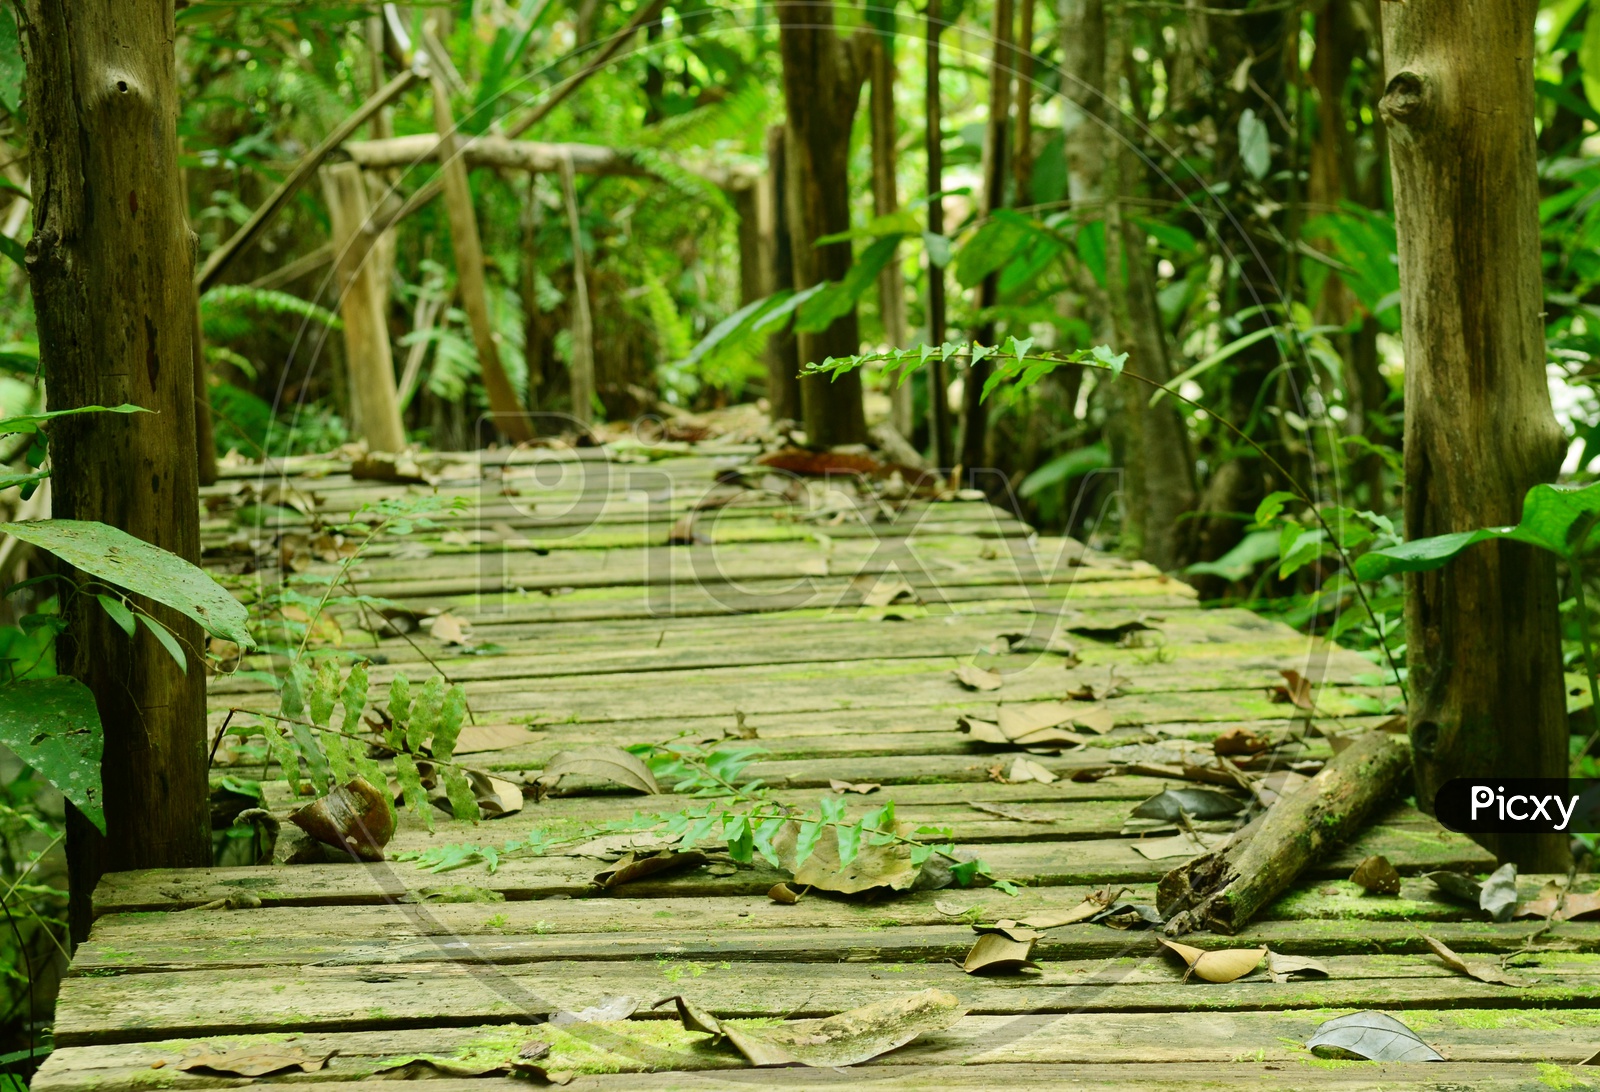 Wood path during fall along the Mangrove forest, Thailand